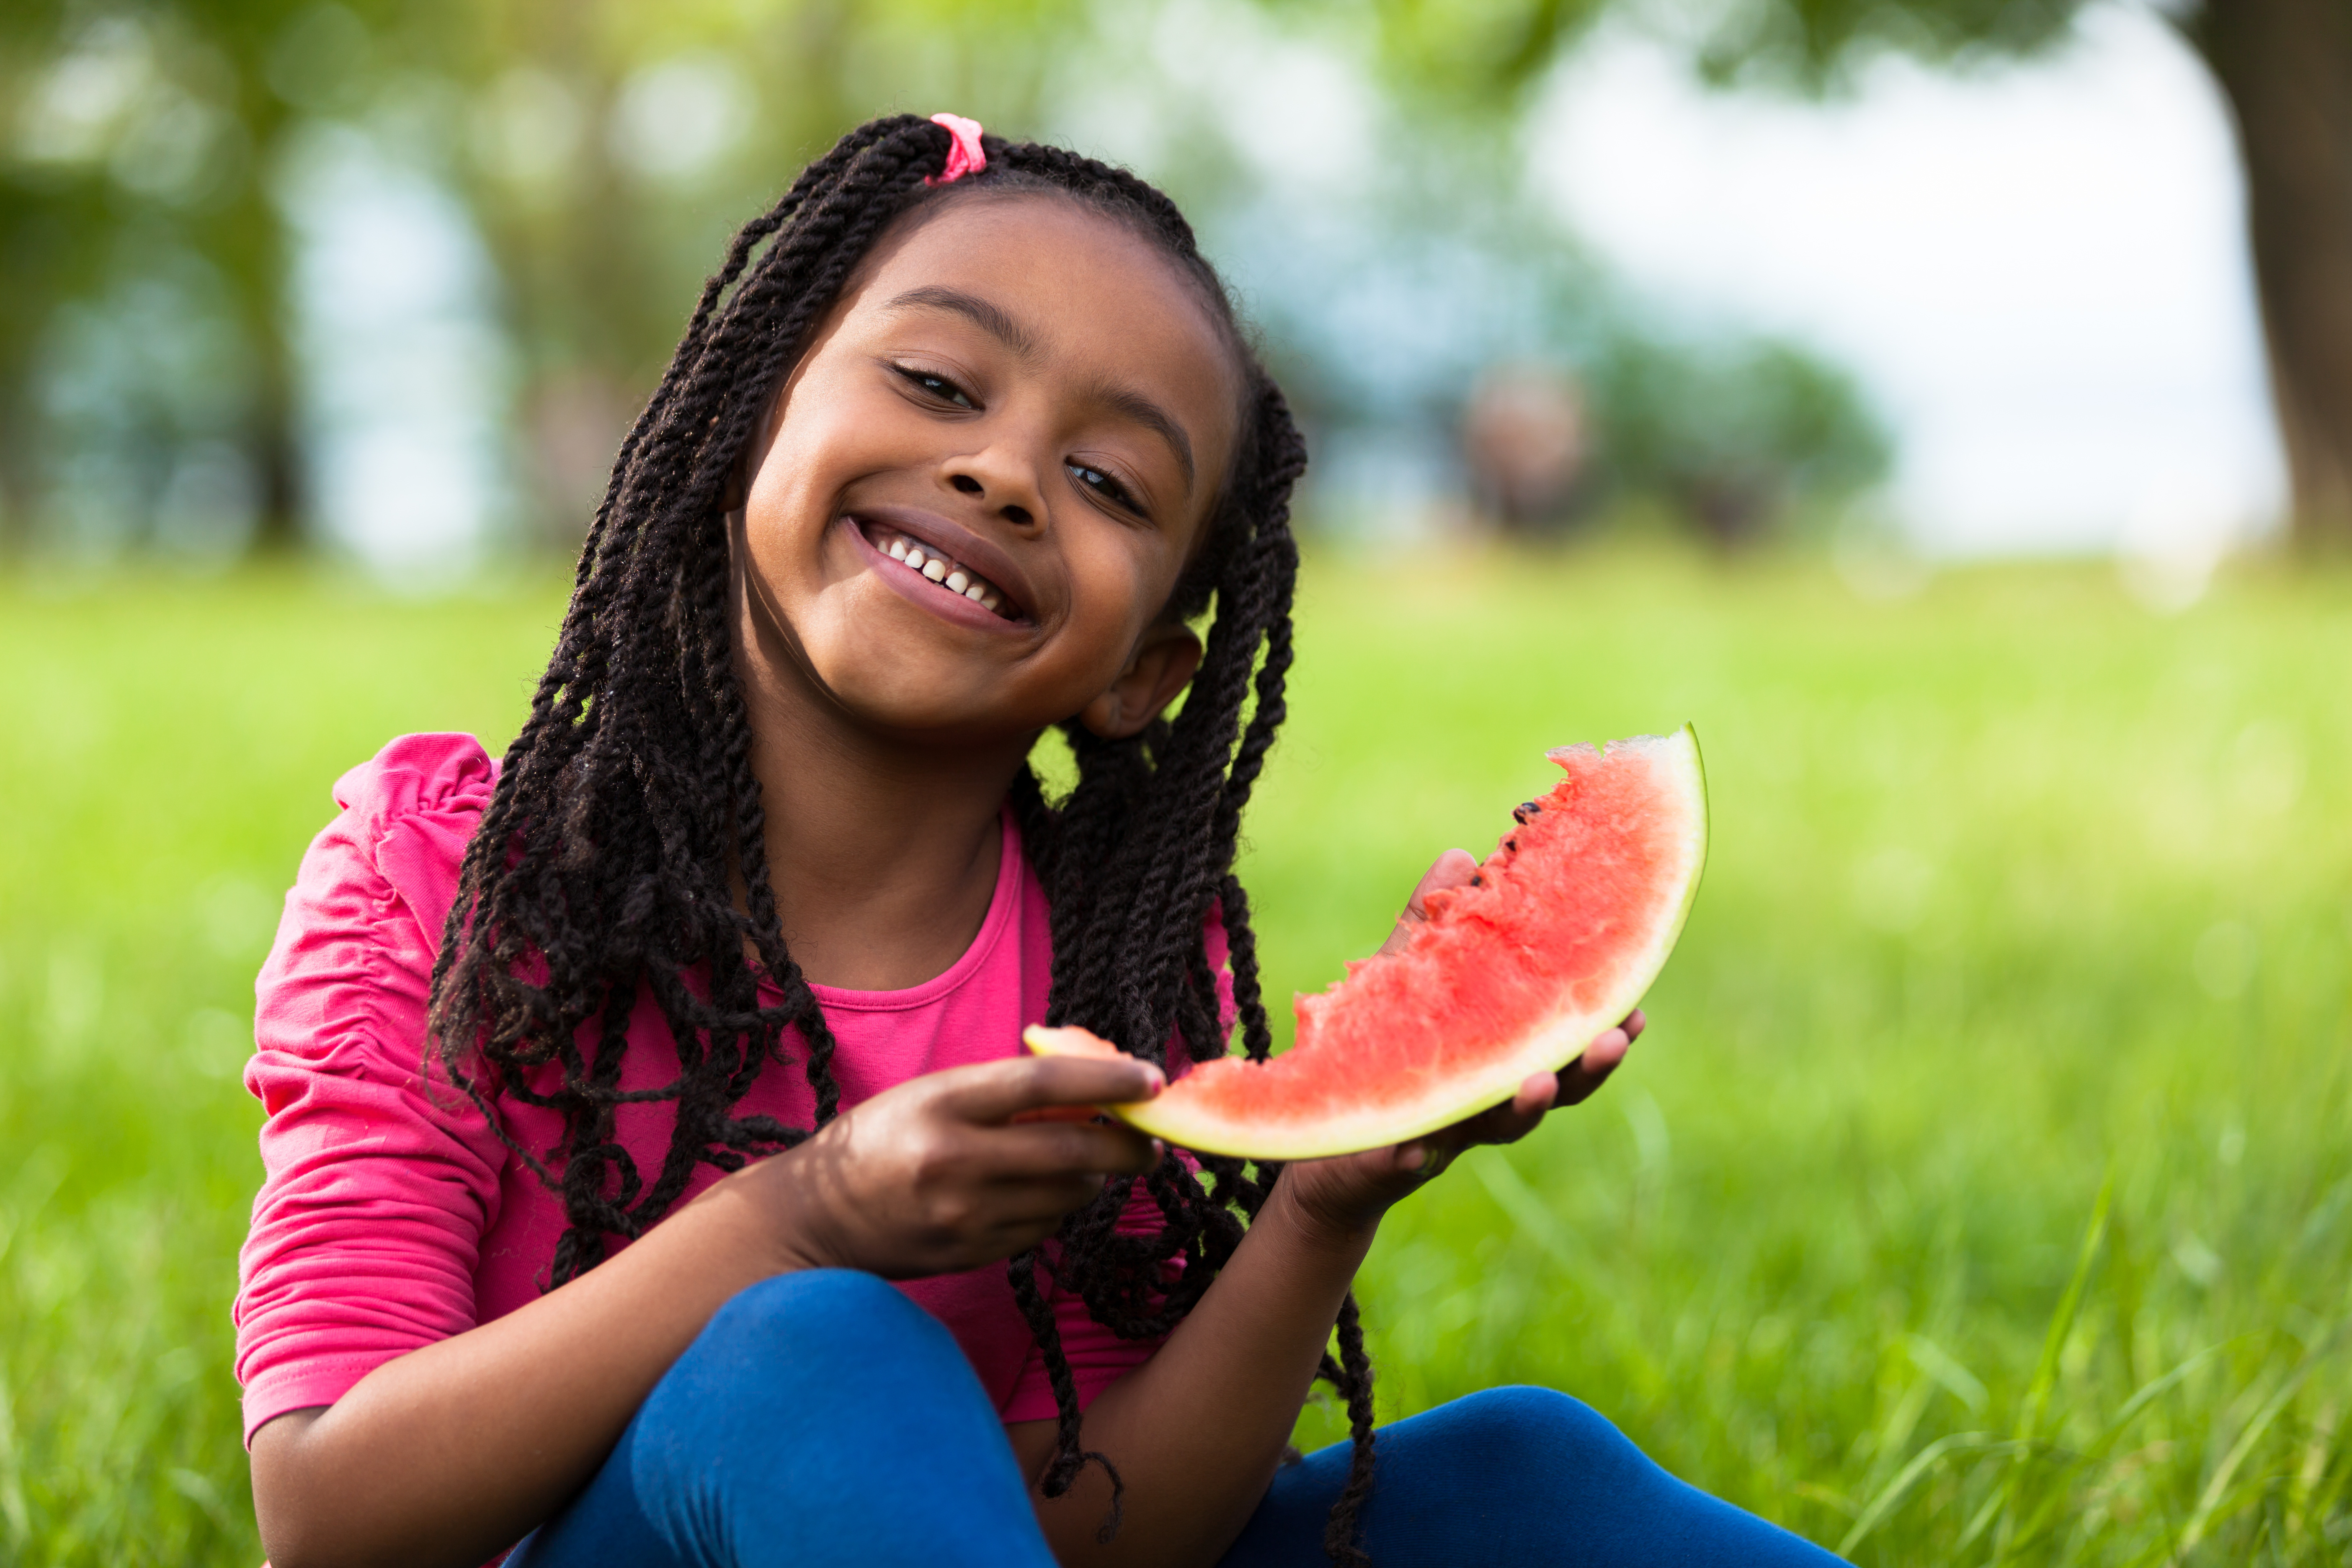 Girl Smiling and Holding Watermelon